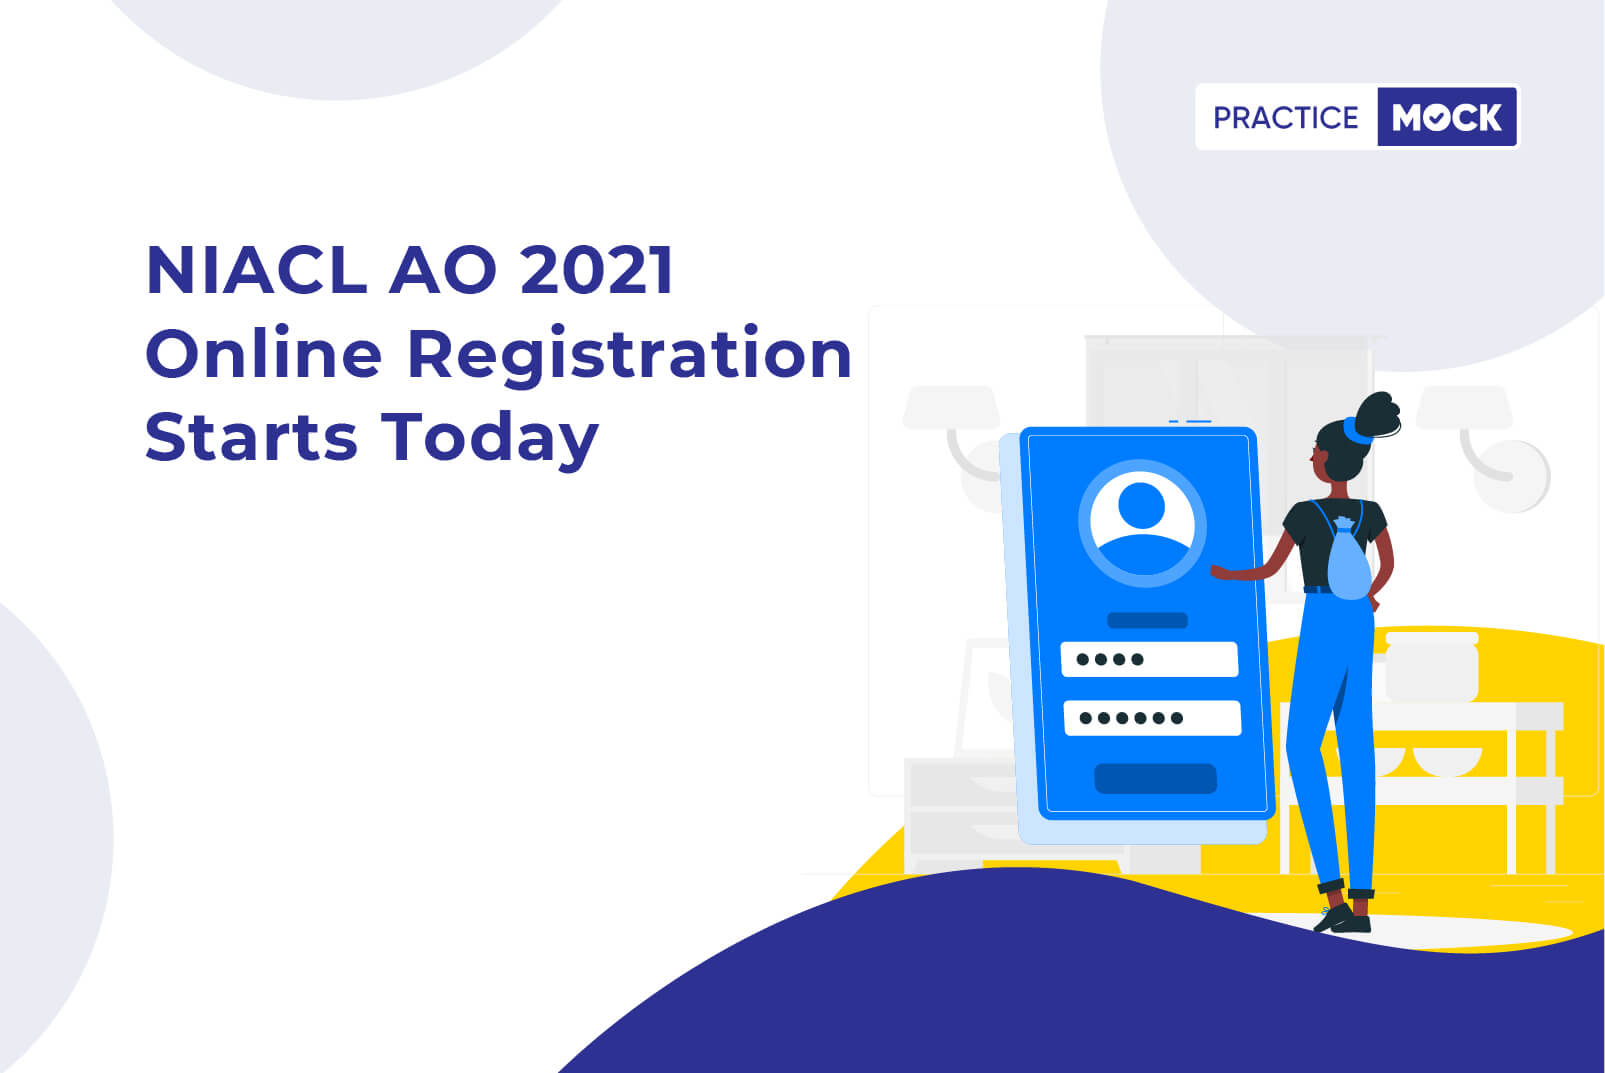 NIACL AO online registration